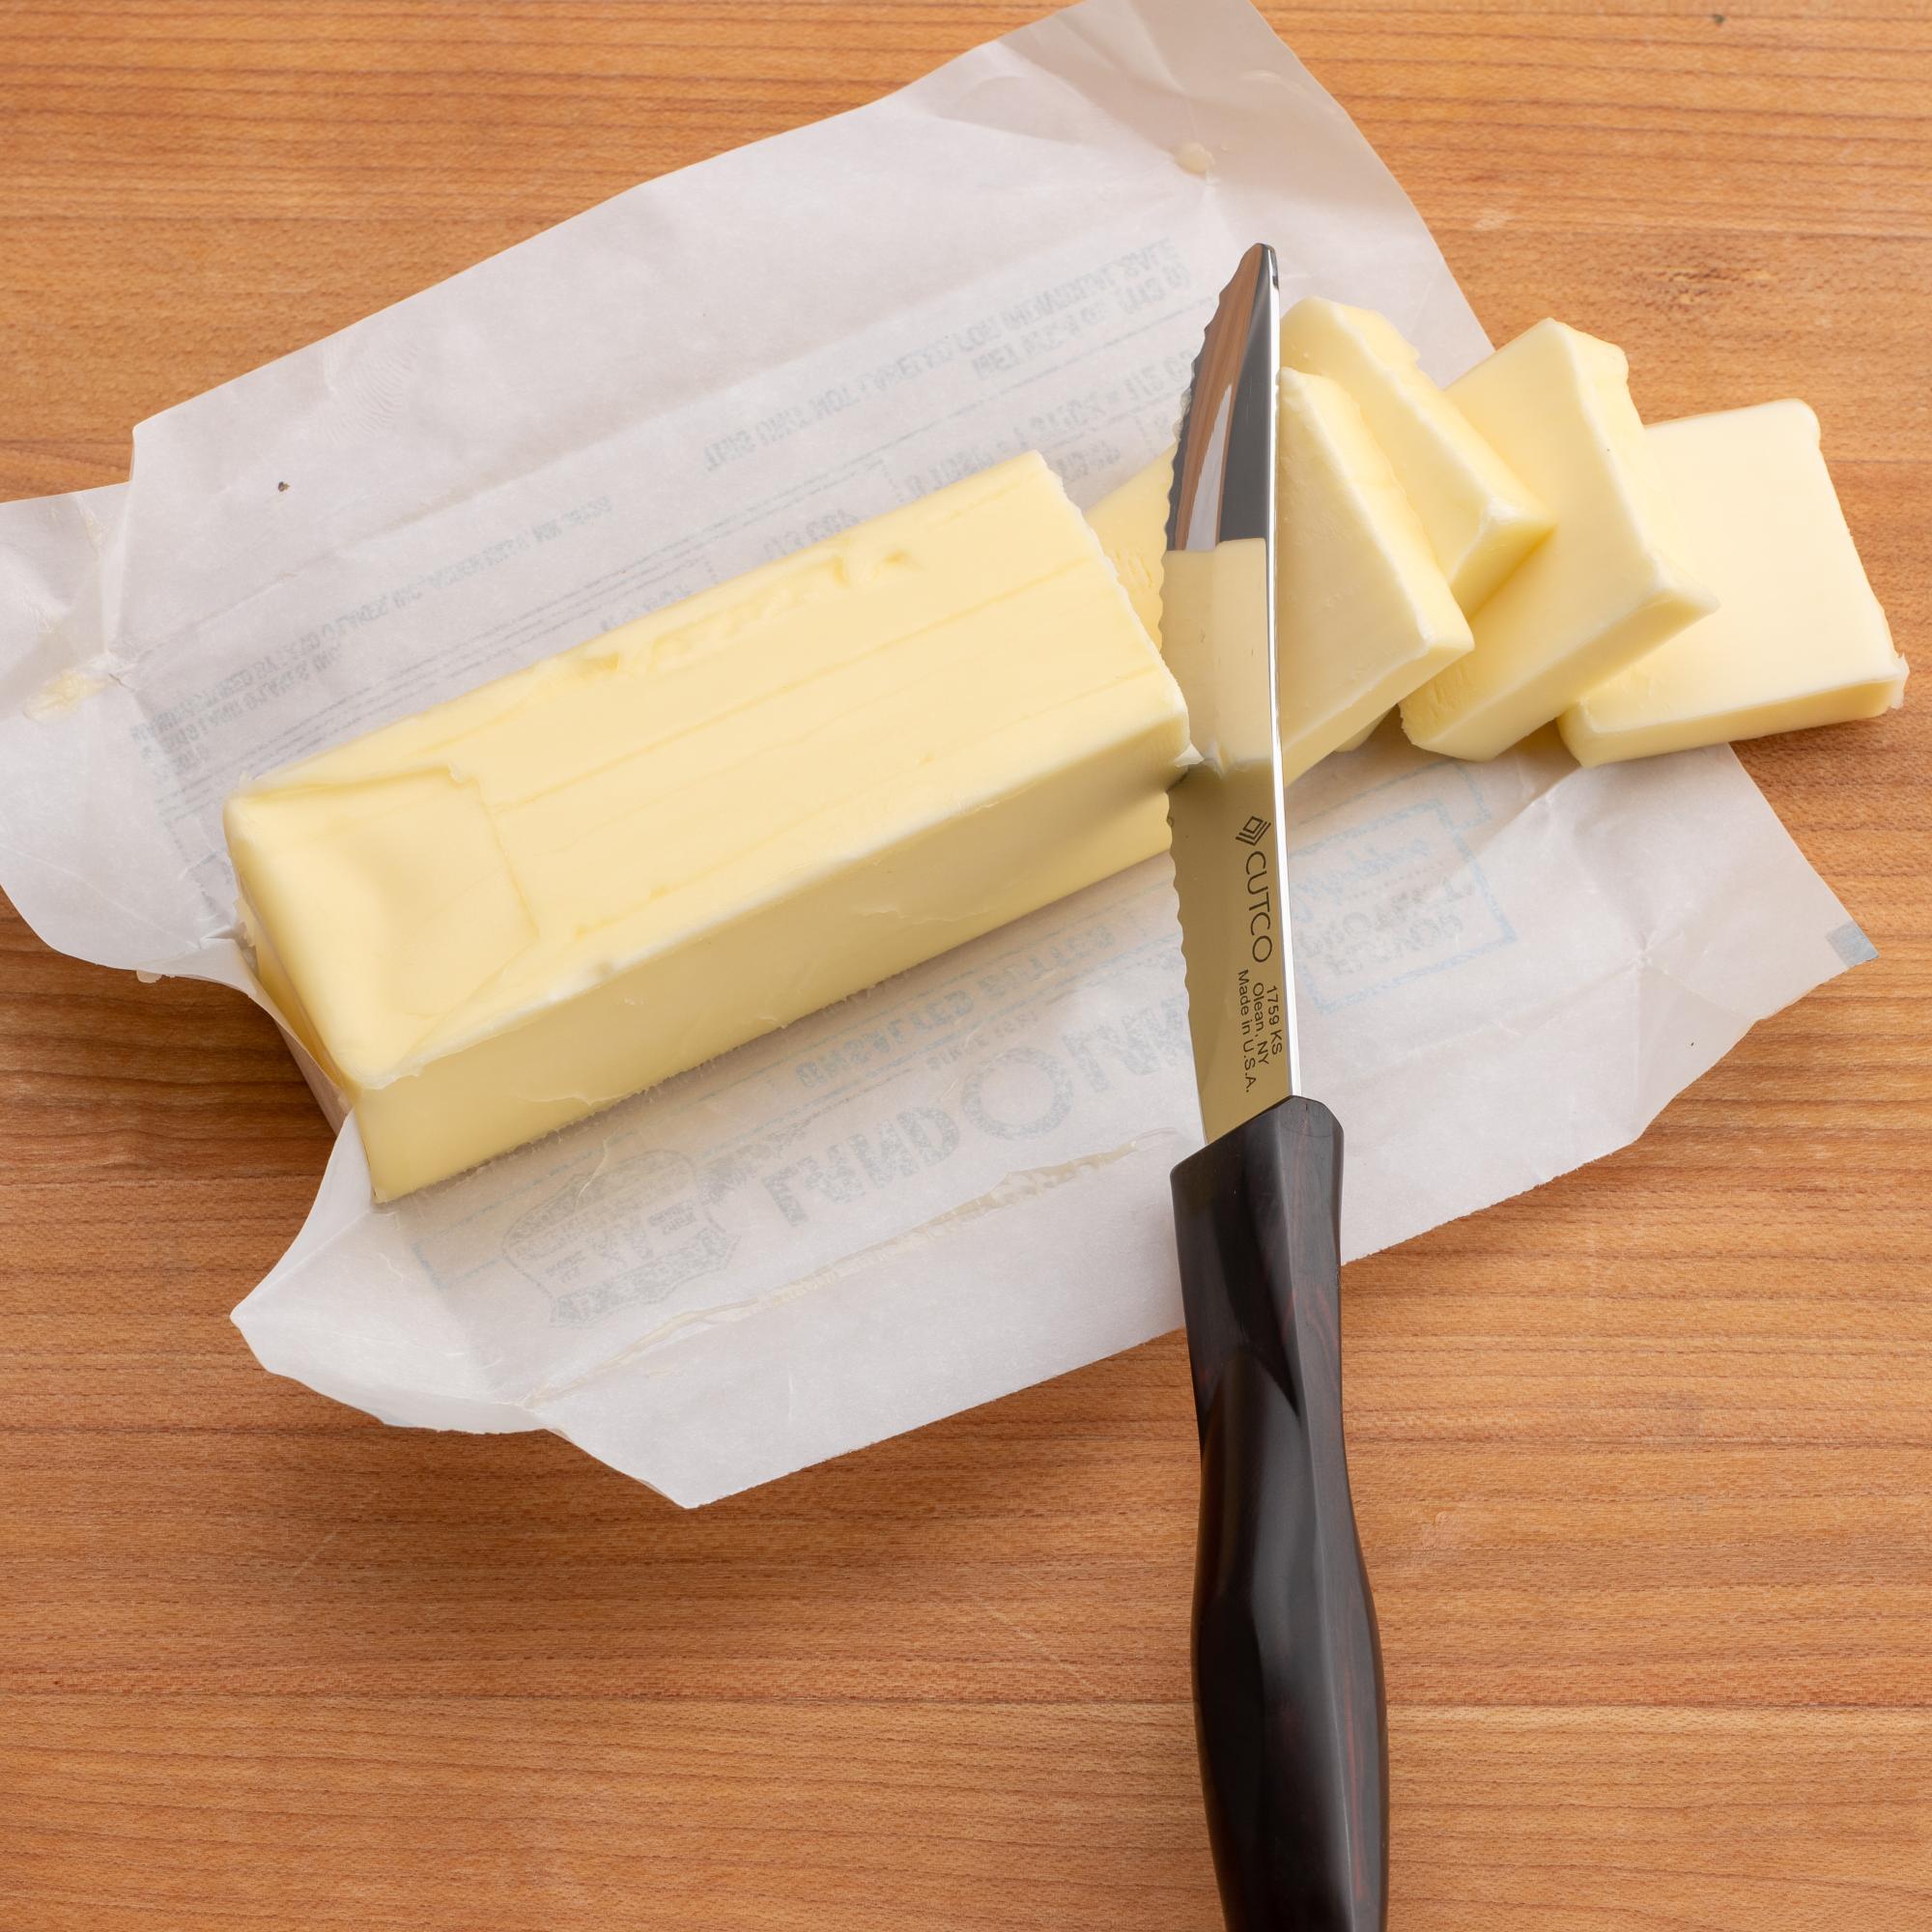 Cutting butter with a Table Knife.